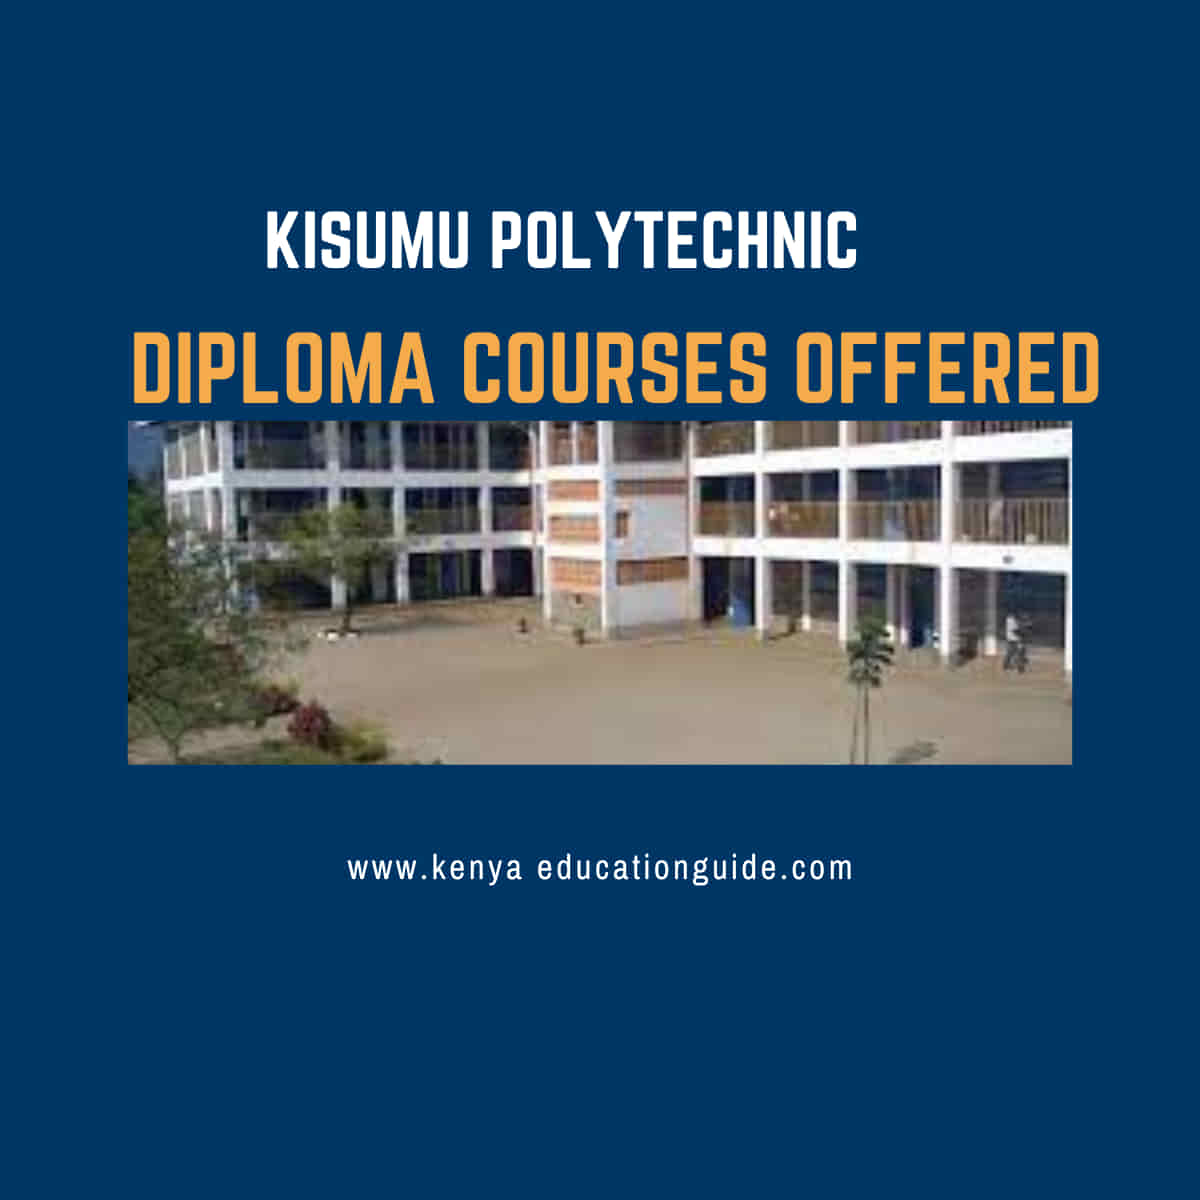 Diploma courses offered at Kisumu polytechnic [All you need to know]